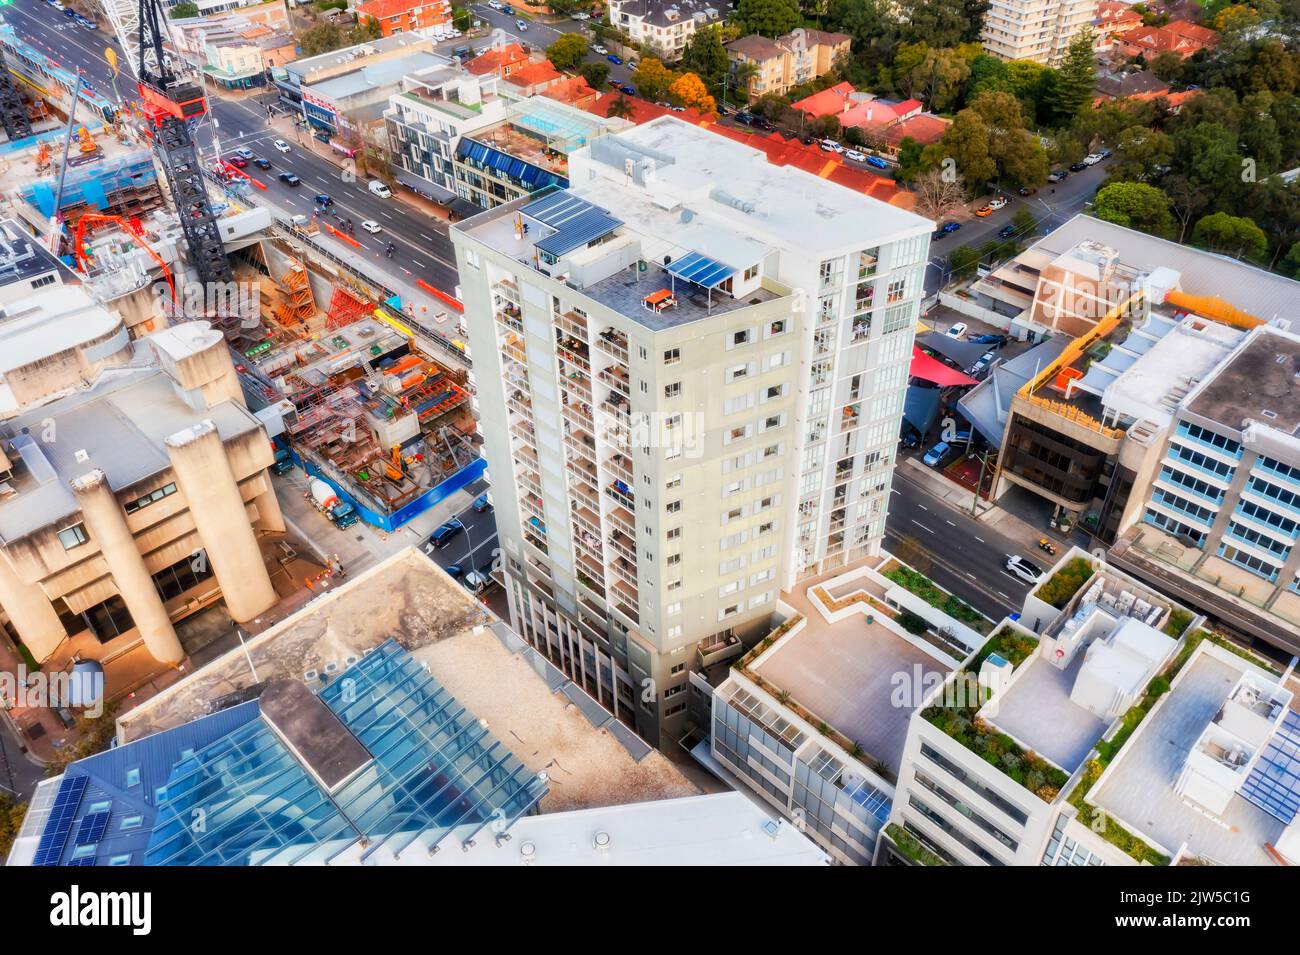 Dense development of high-rise residential apartment building towers around new Crows Nest metro station in Sydney lower north shore suburbs. Stock Photo